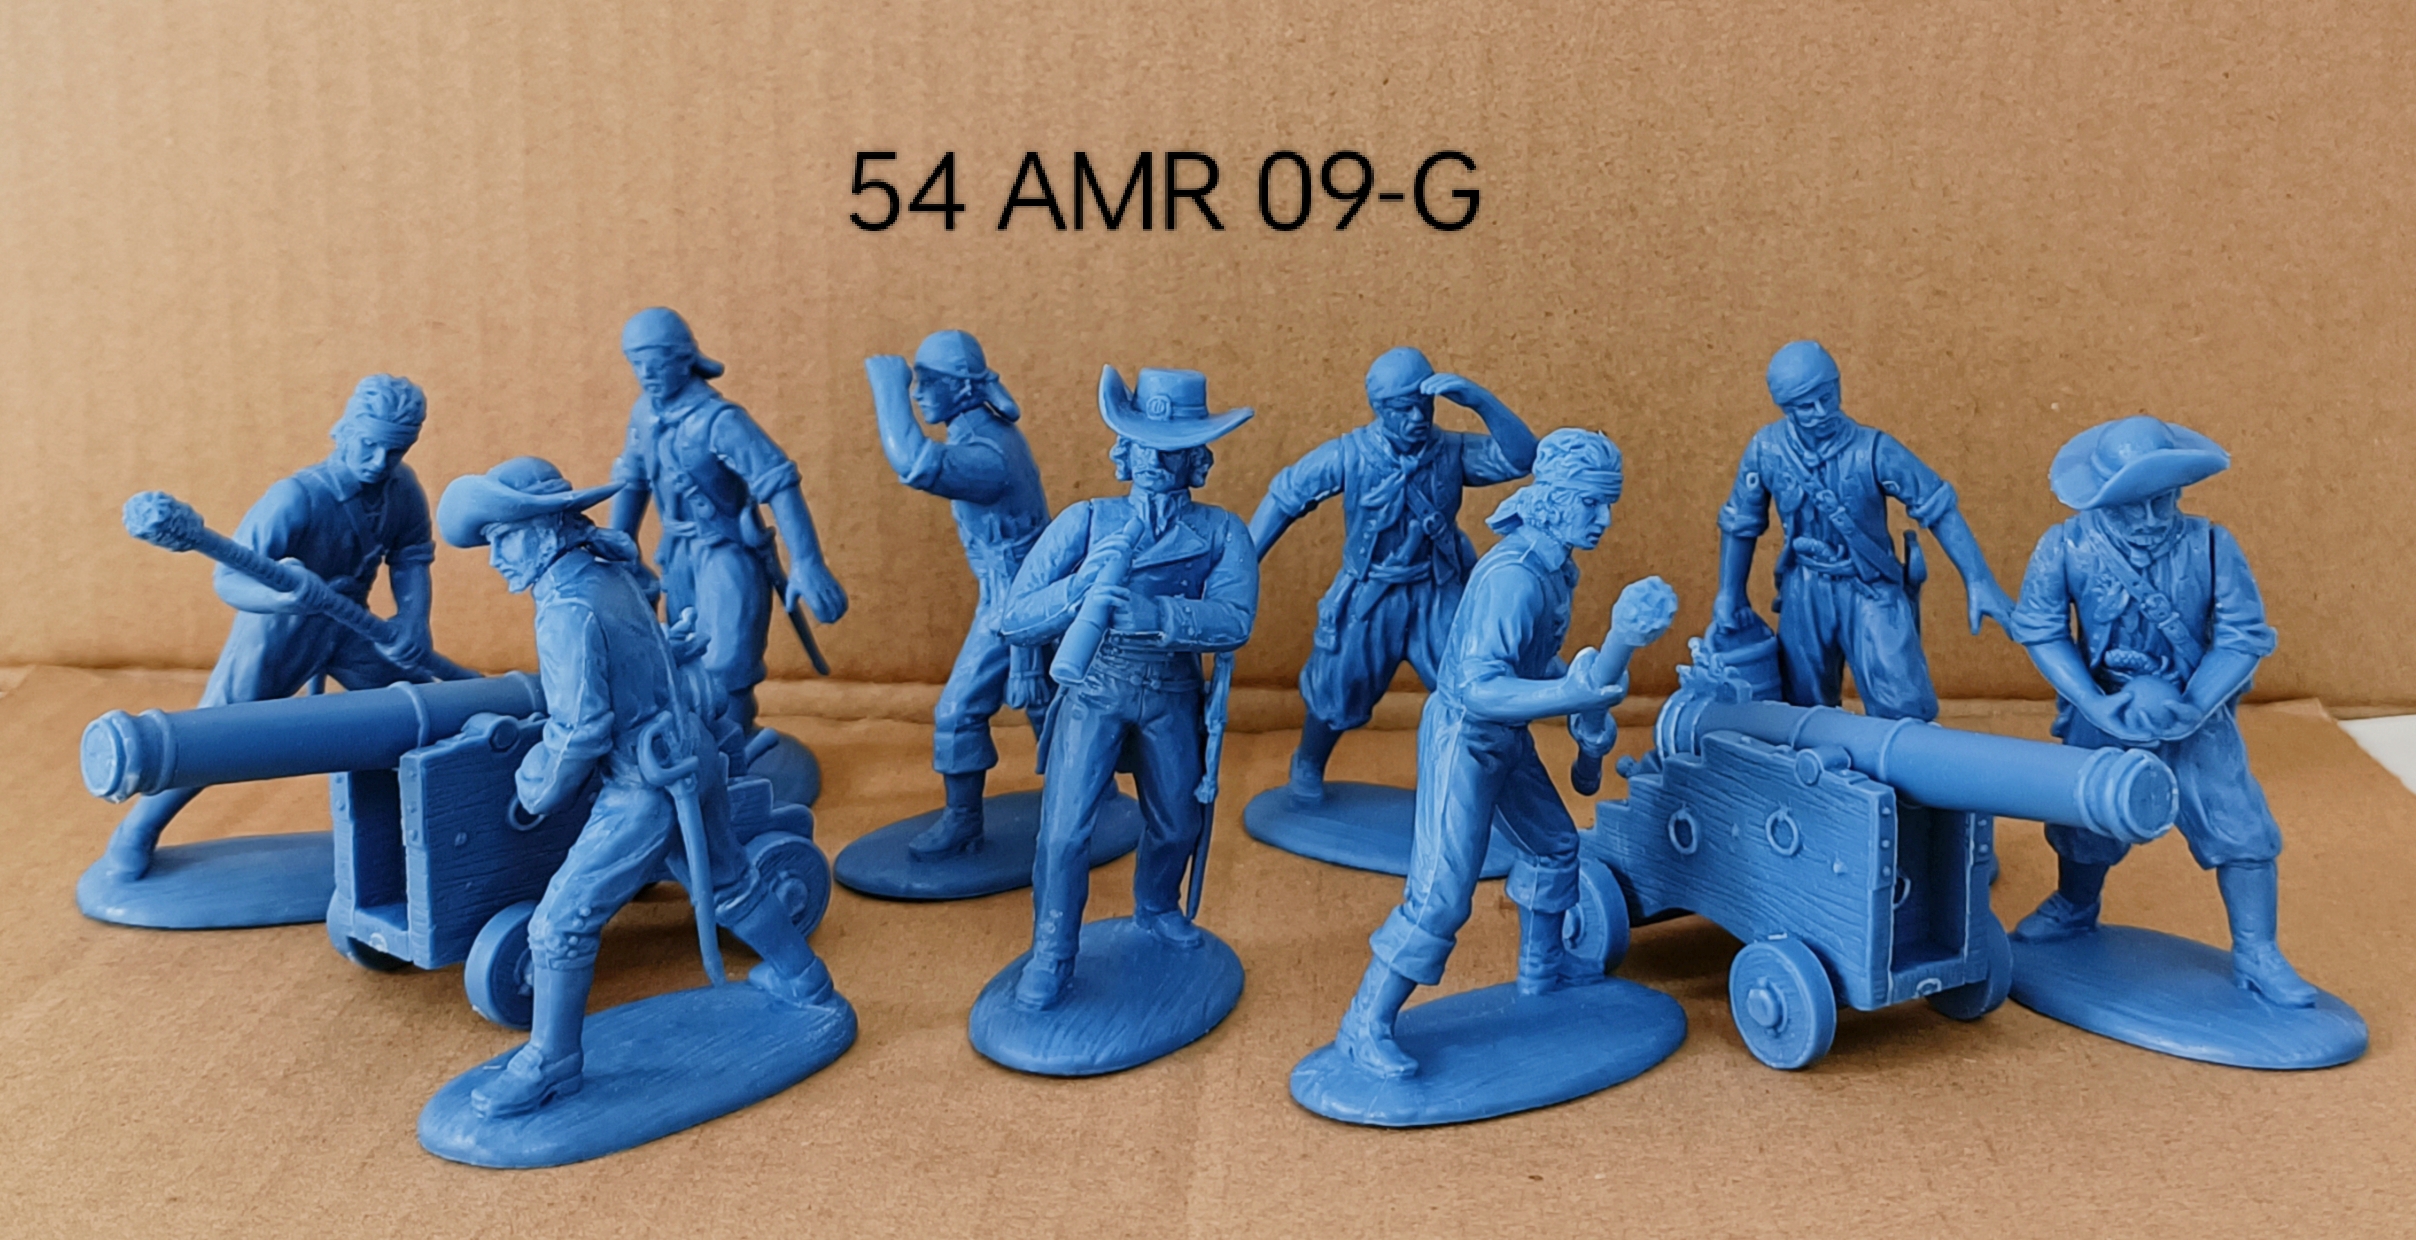 54 AMR 09-G	Naval Guns with Pirate Crew